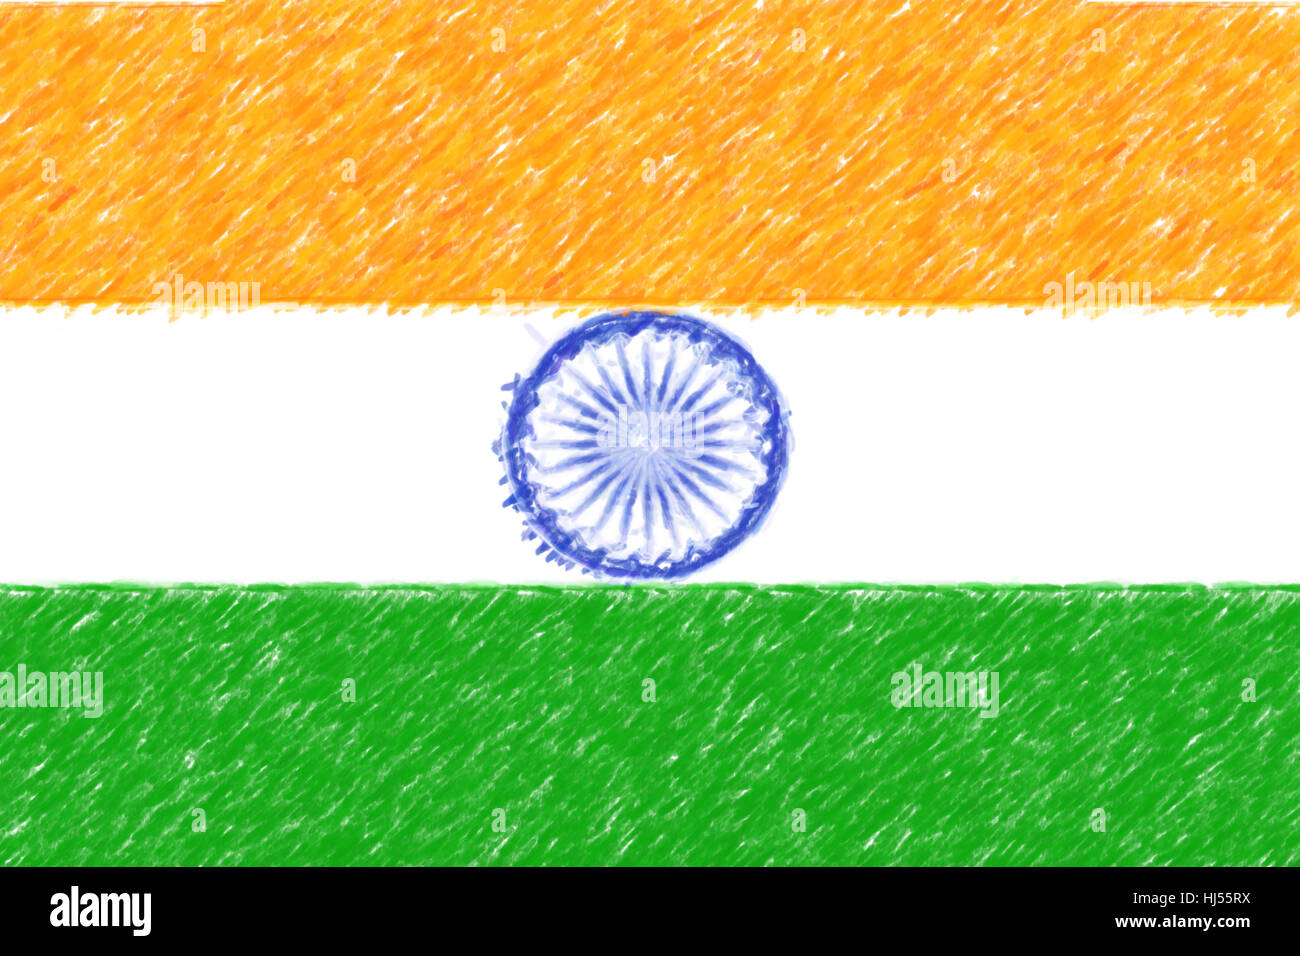 220 Indian National Flag Drawing Stock Photos Pictures  RoyaltyFree  Images  iStock